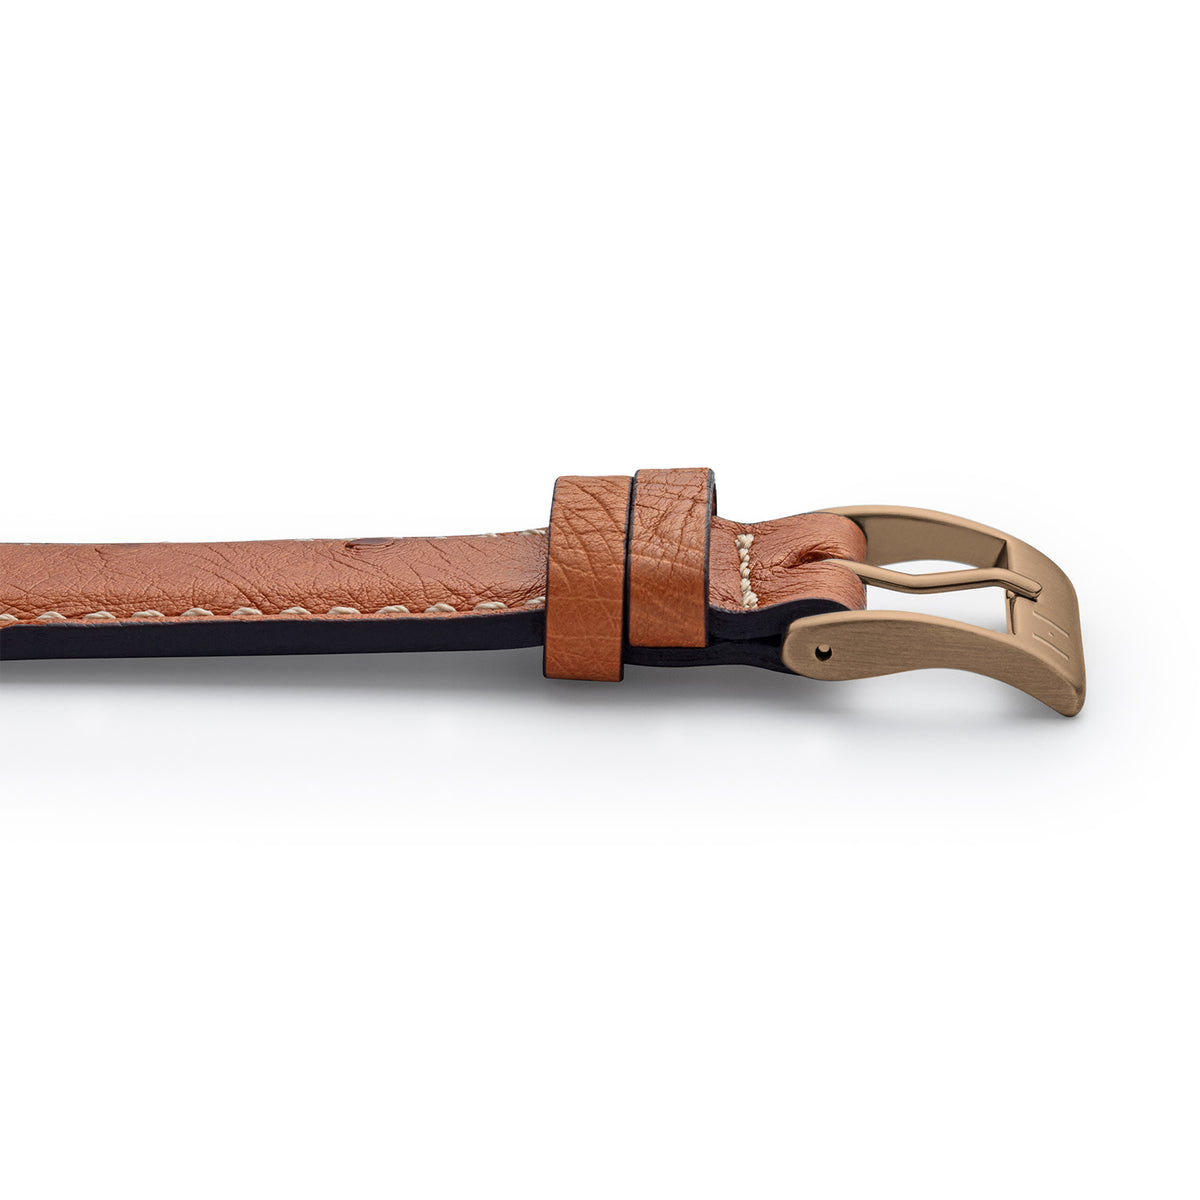 Apple Watch leather strap made of ostrich leather &quot;OBERKASSEL&quot; - cognac